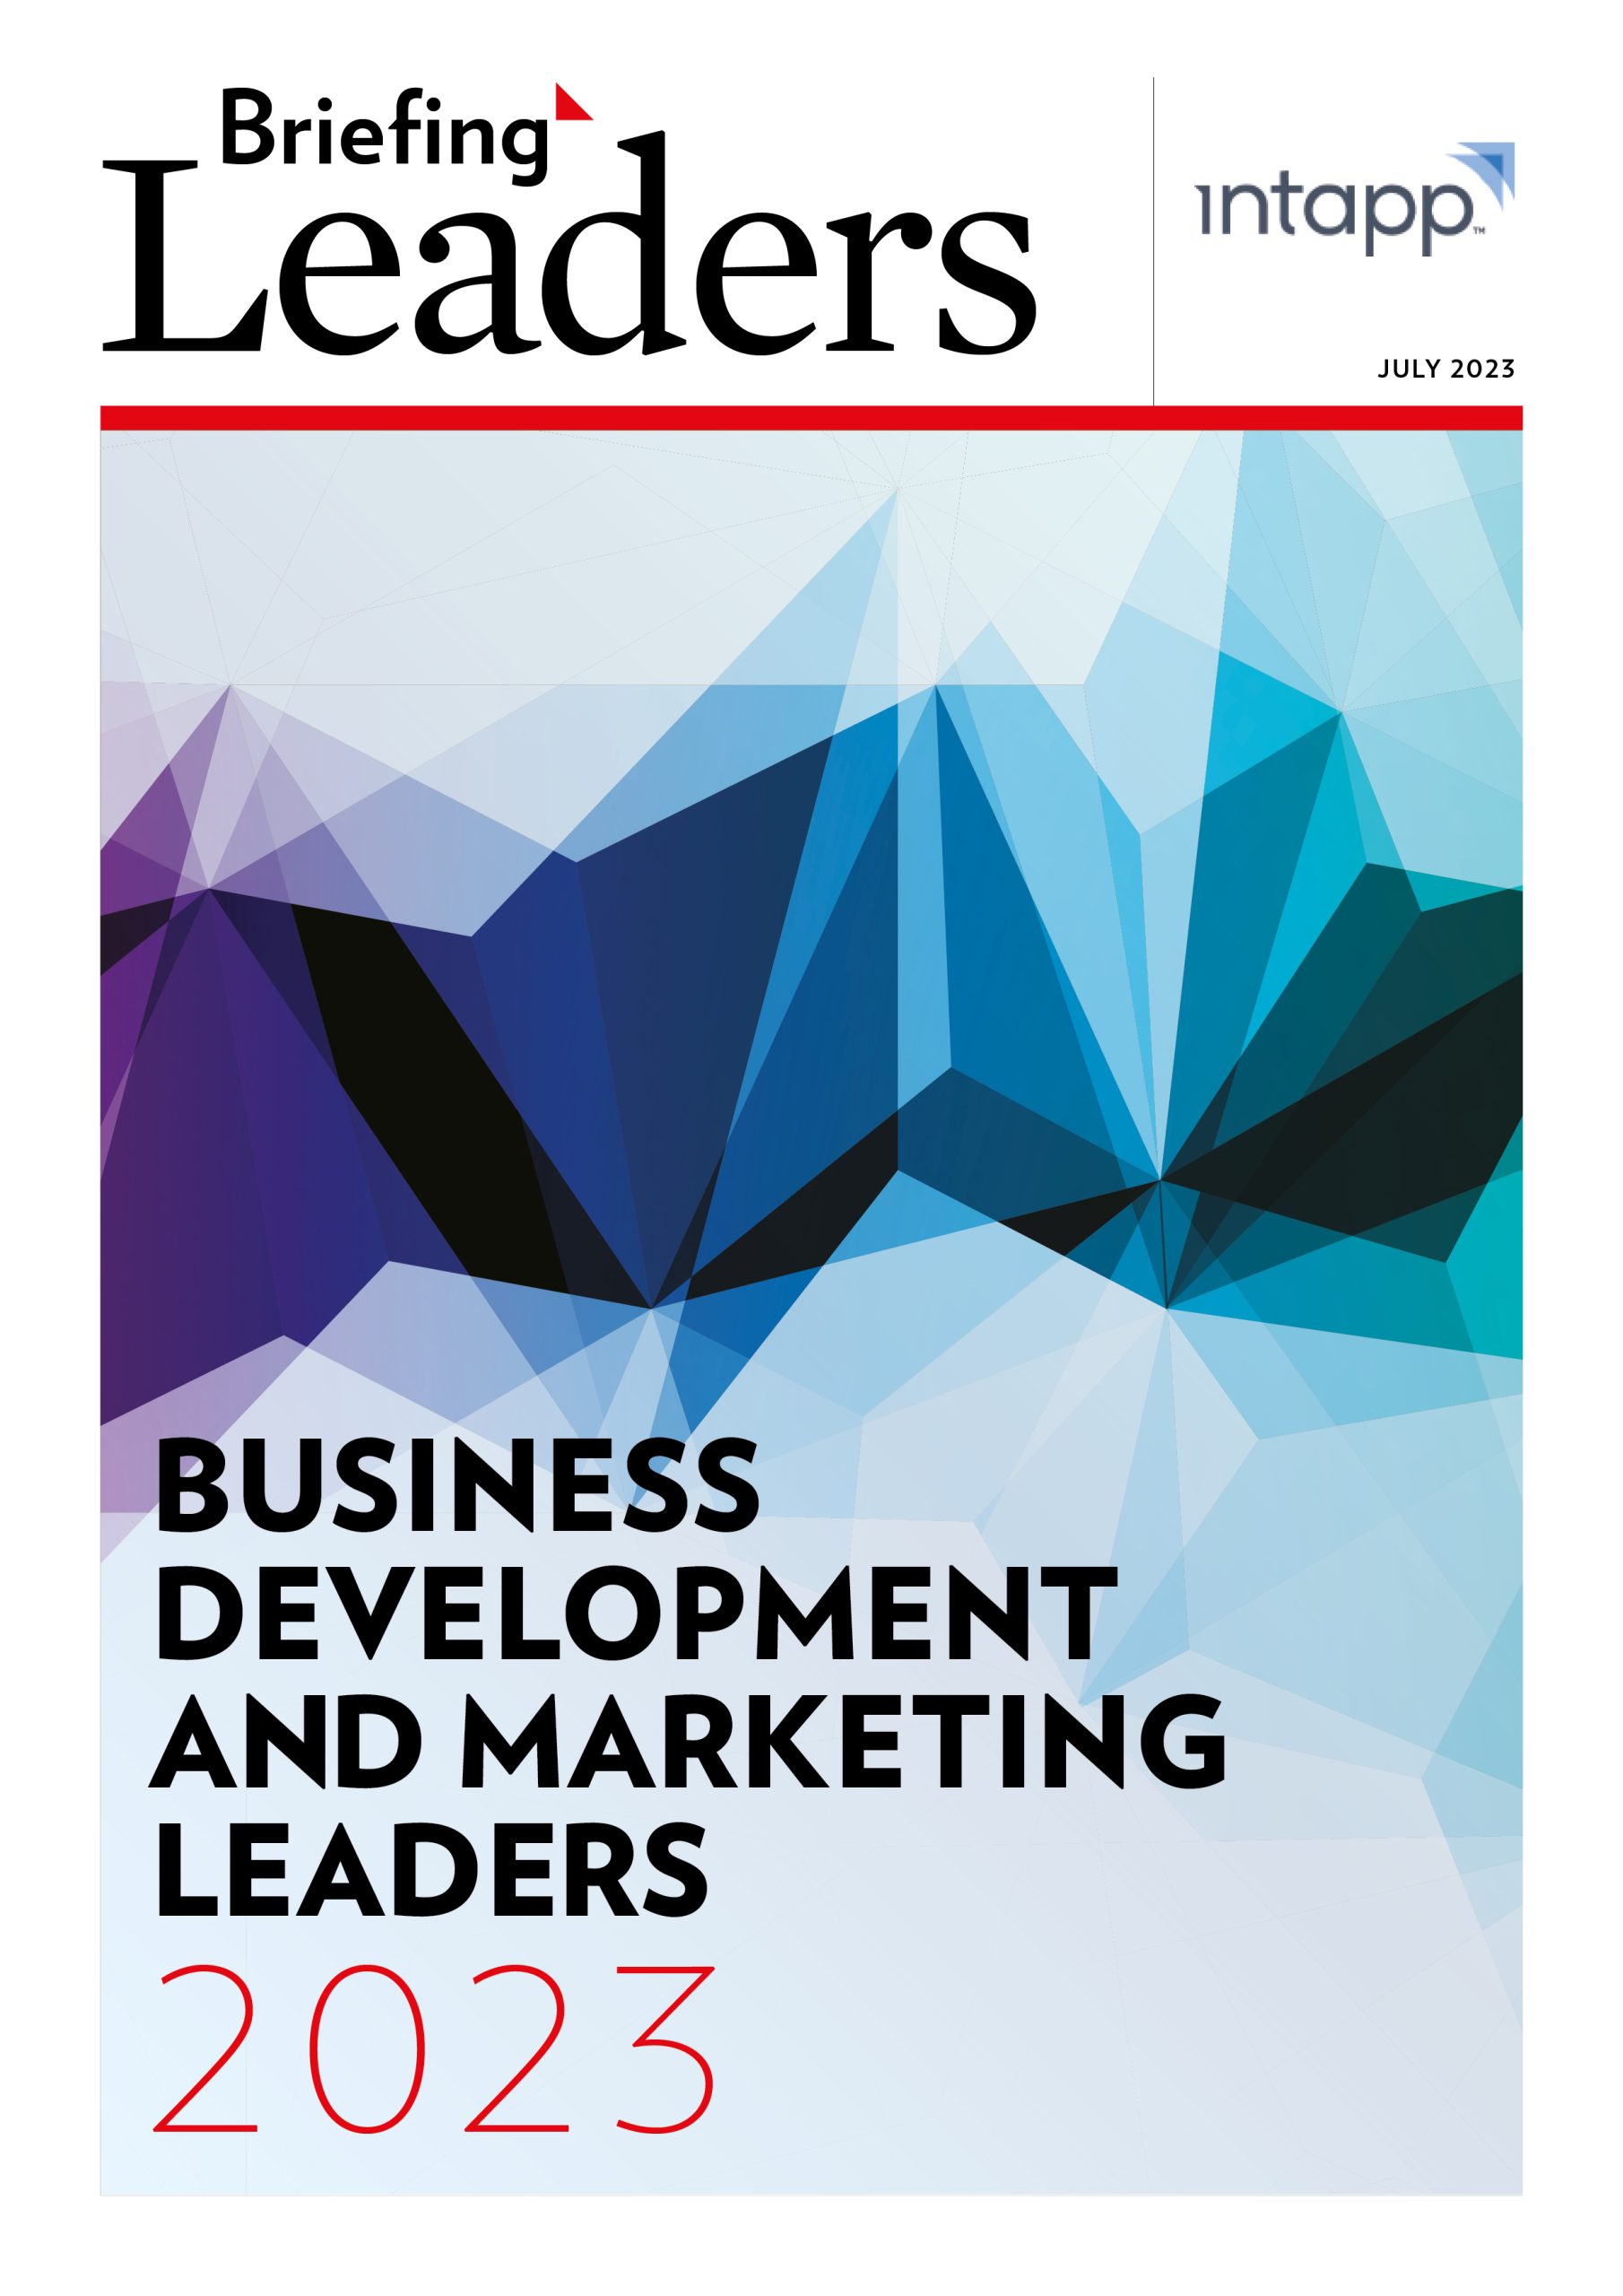 Business development and marketing leaders 2023